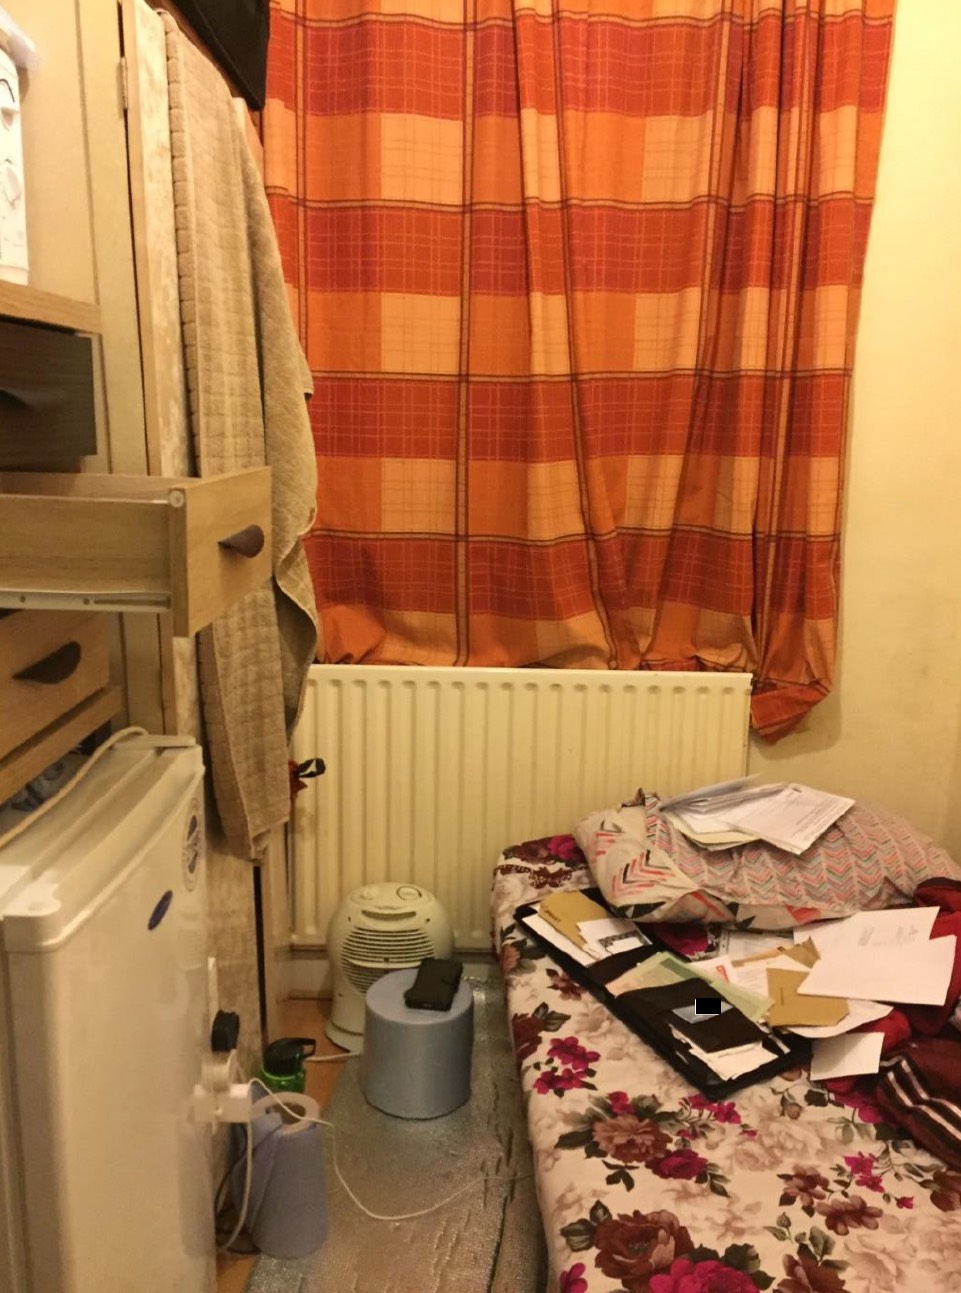 Illegally converted large HMO in Ealing 2021